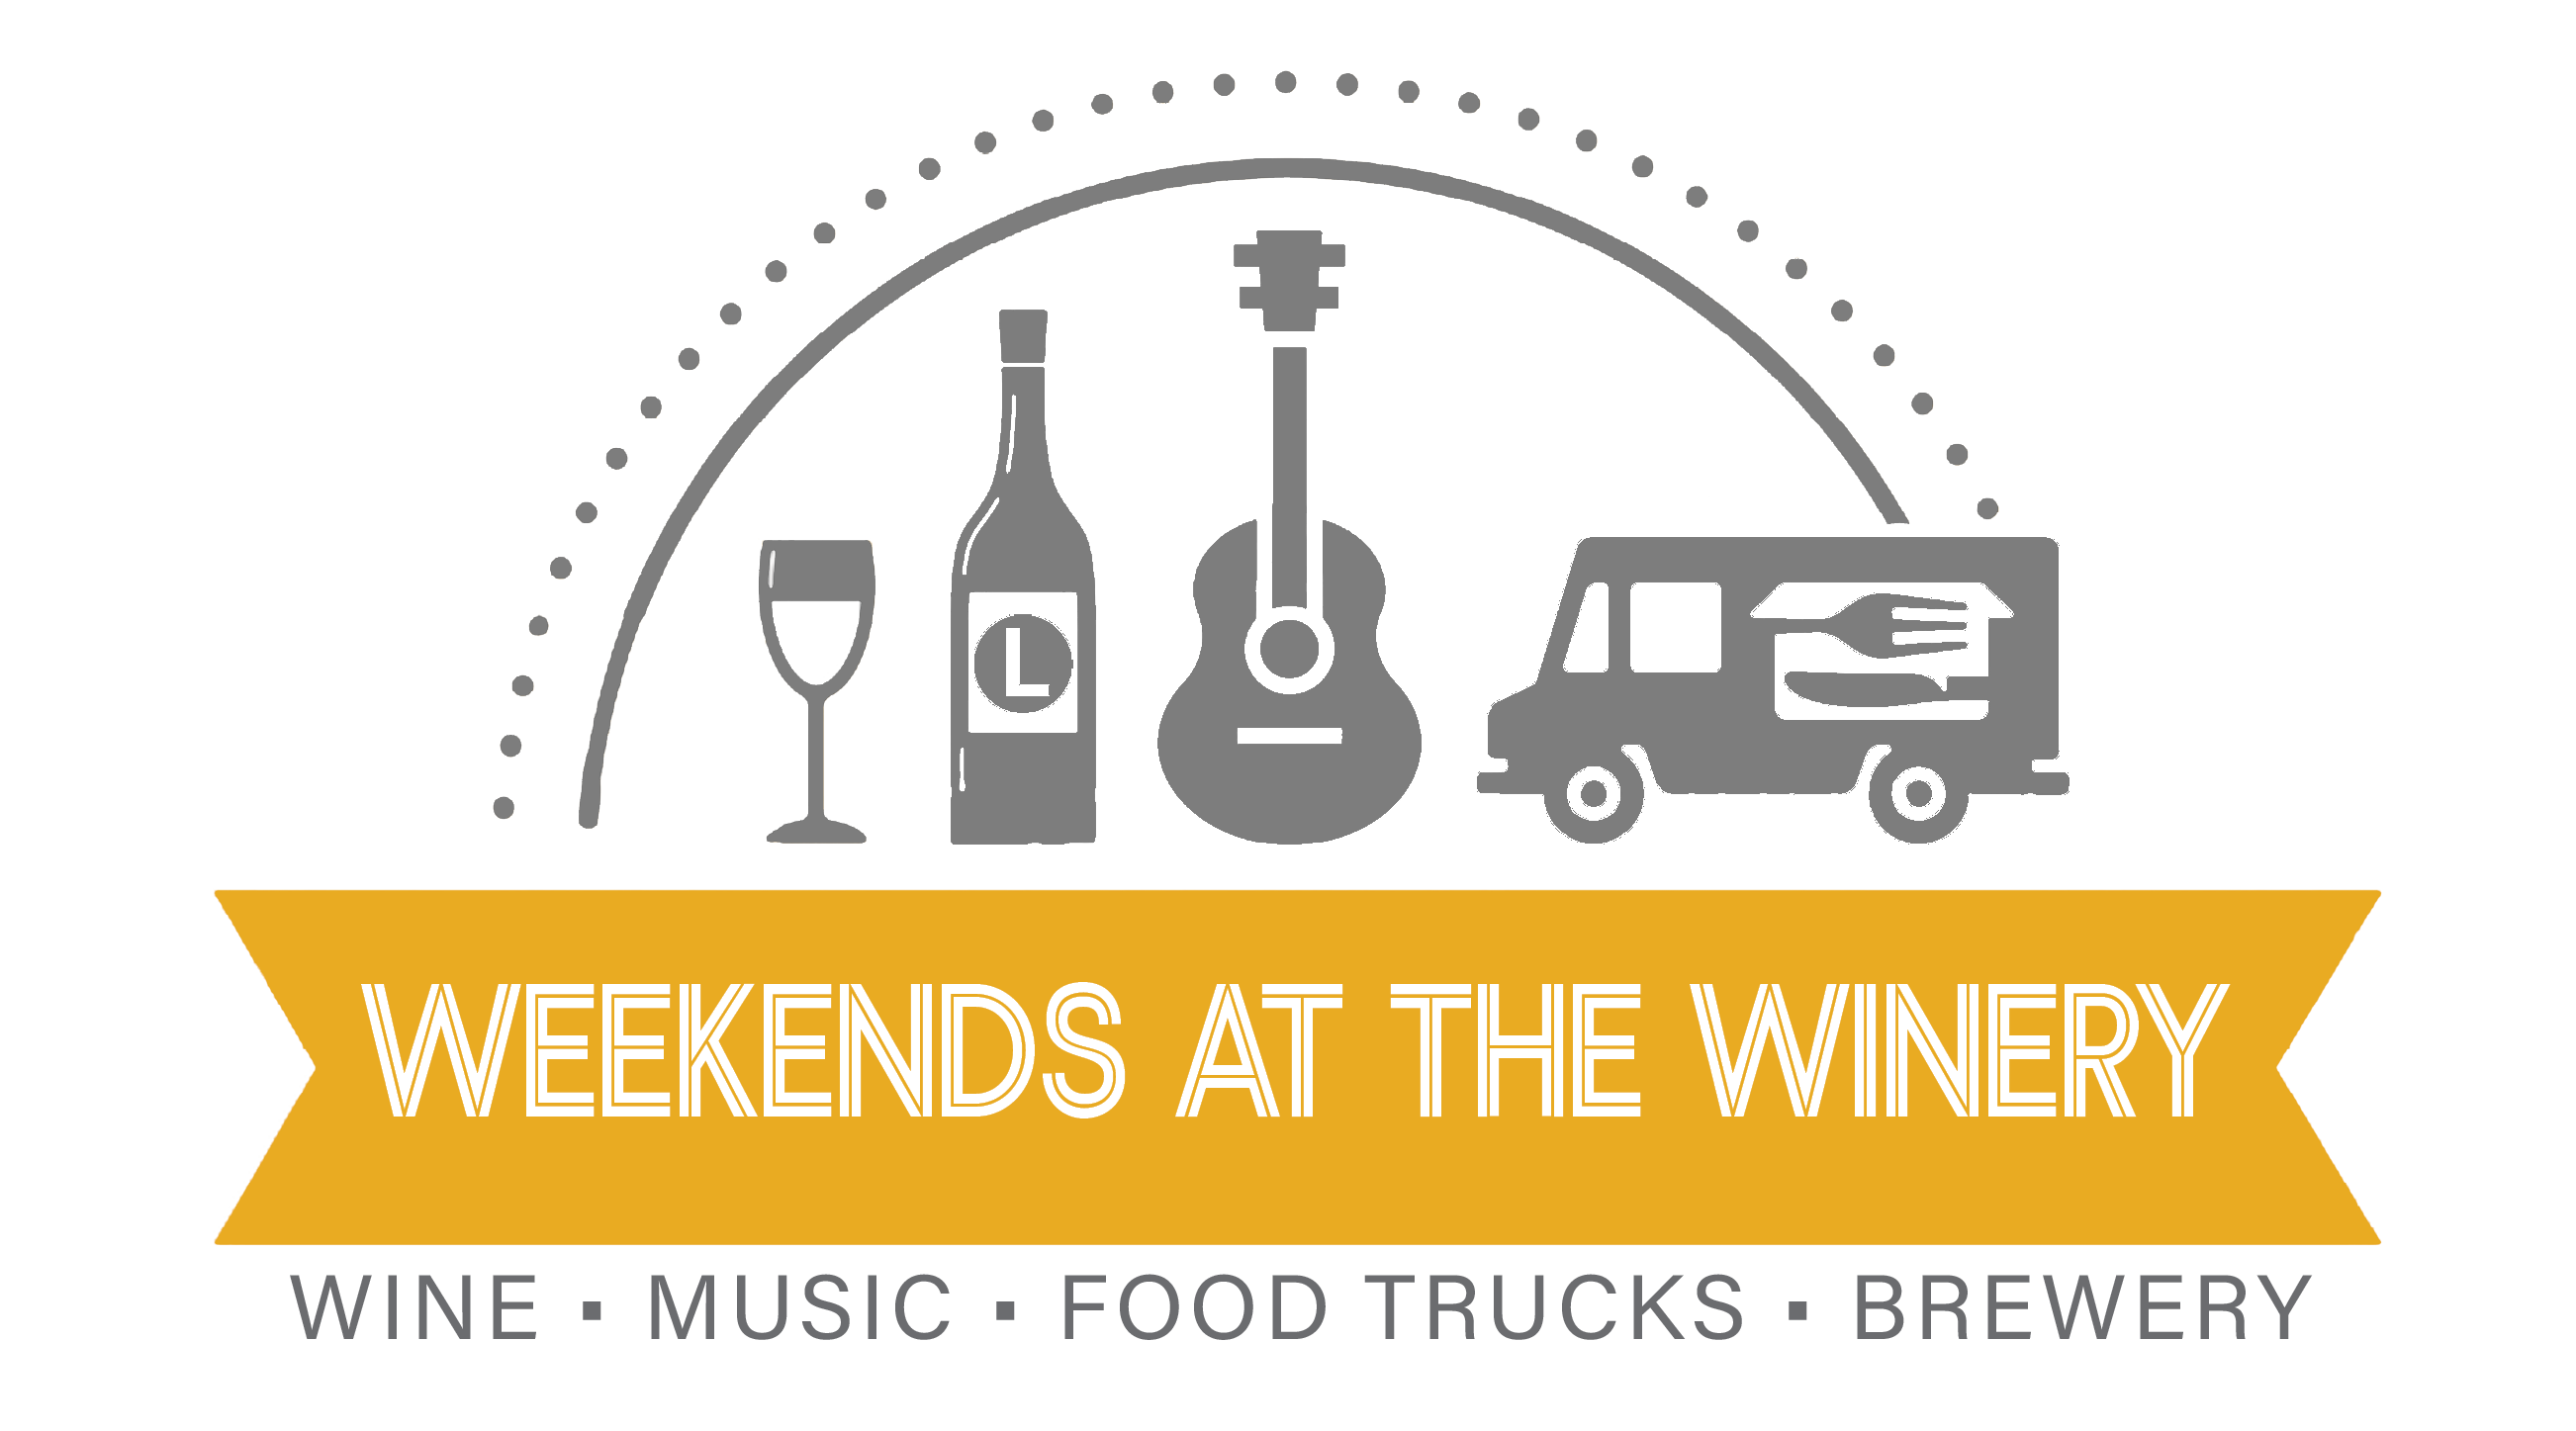 weekends at the winery banner